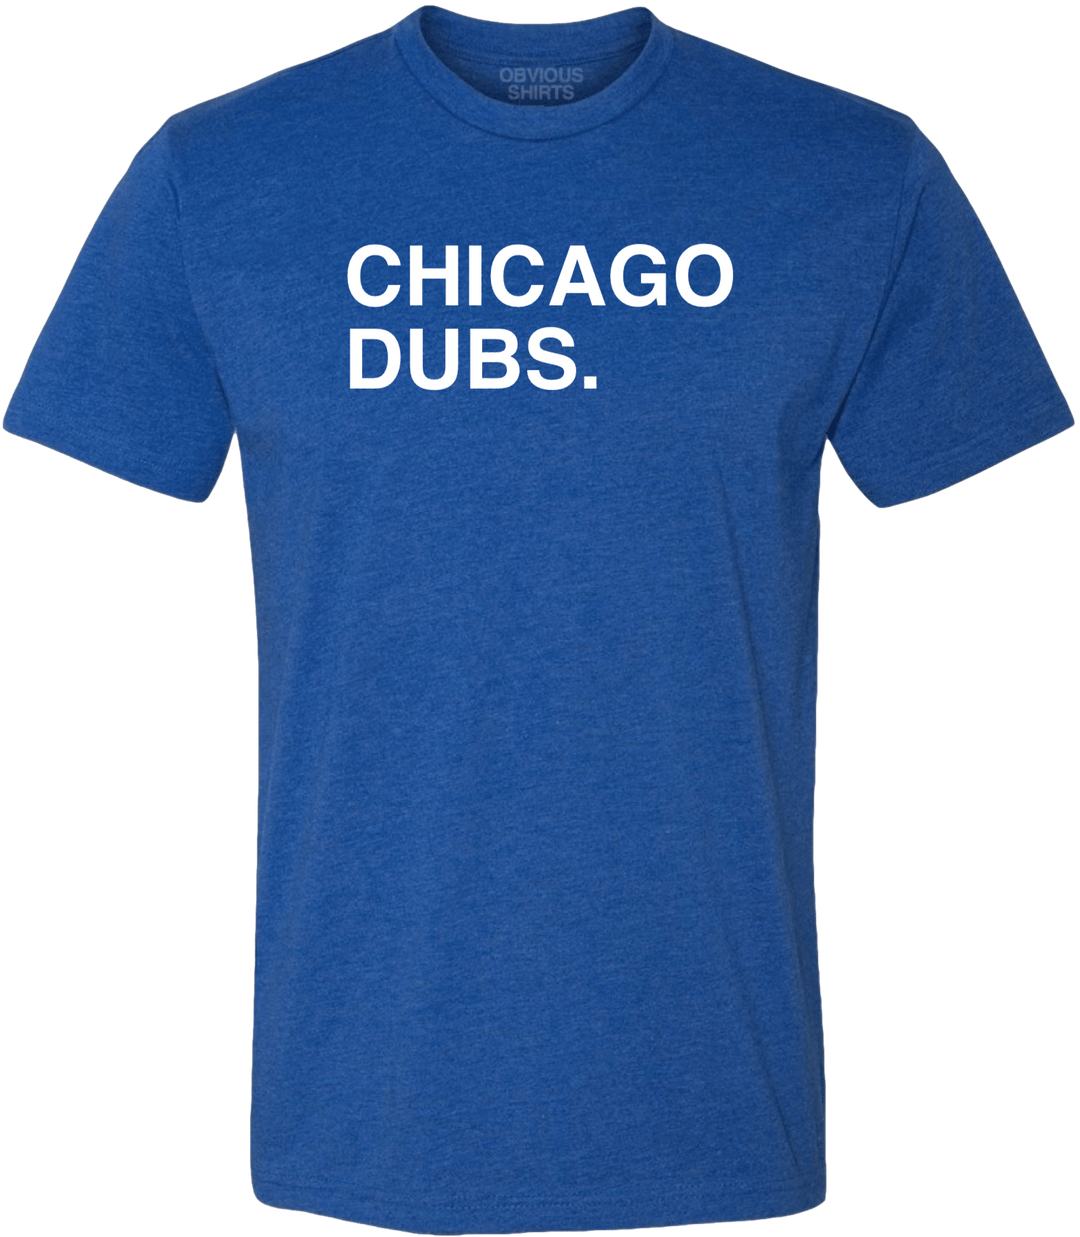 CHICAGO DUBS. - OBVIOUS SHIRTS